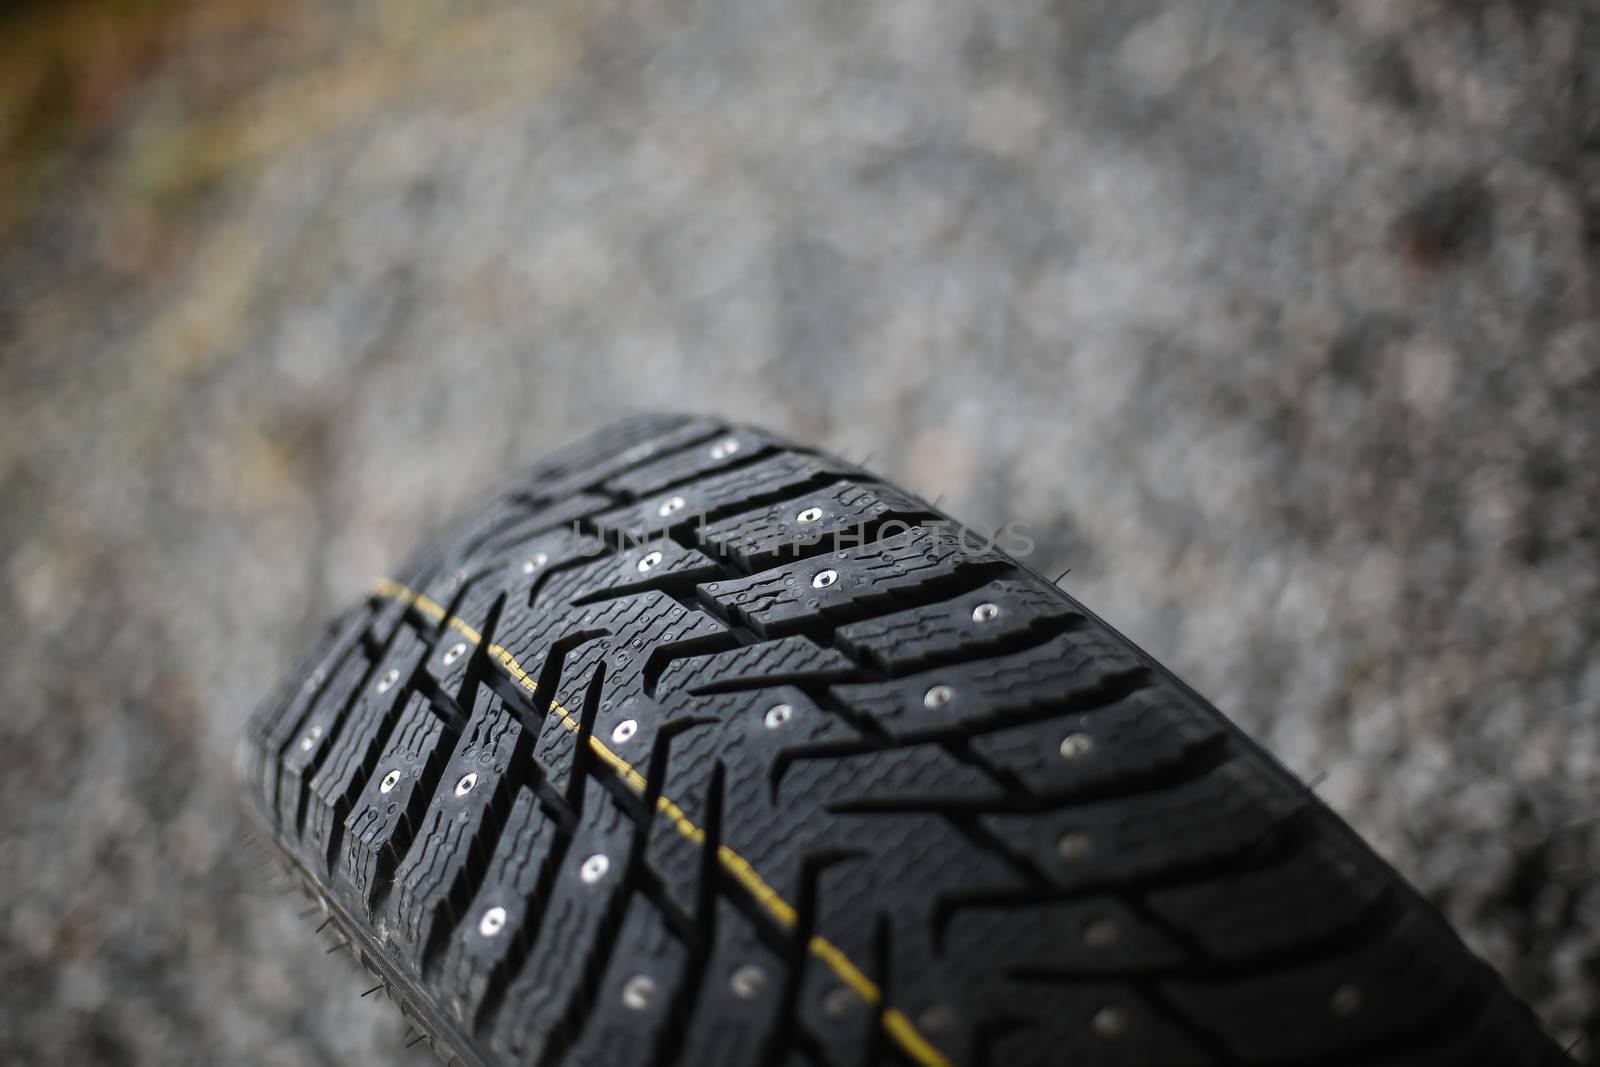 Studded tire on a background